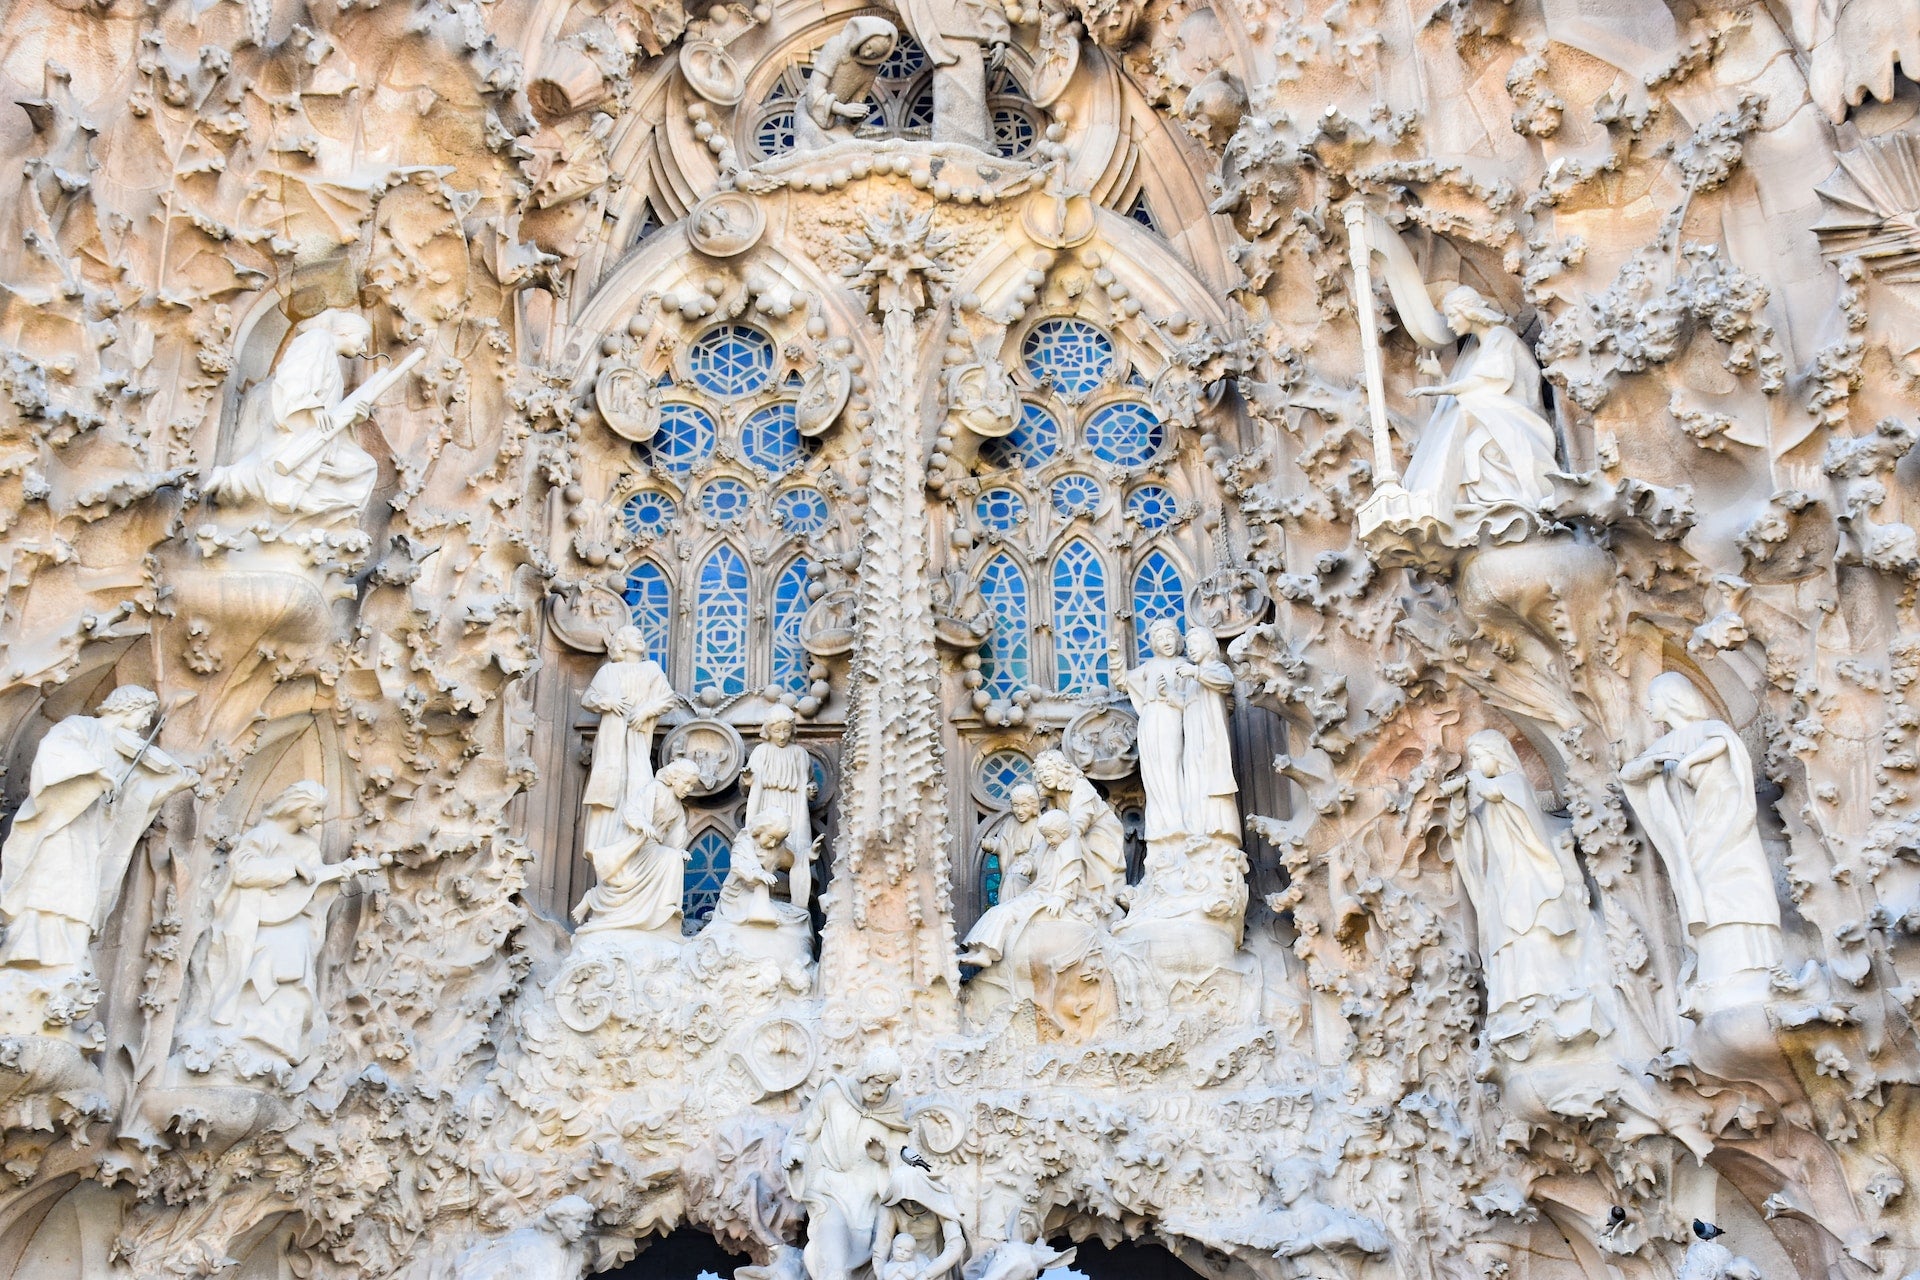 the elaborate facade of the sagrada familia basillica, with sculptures and stained glass windows.